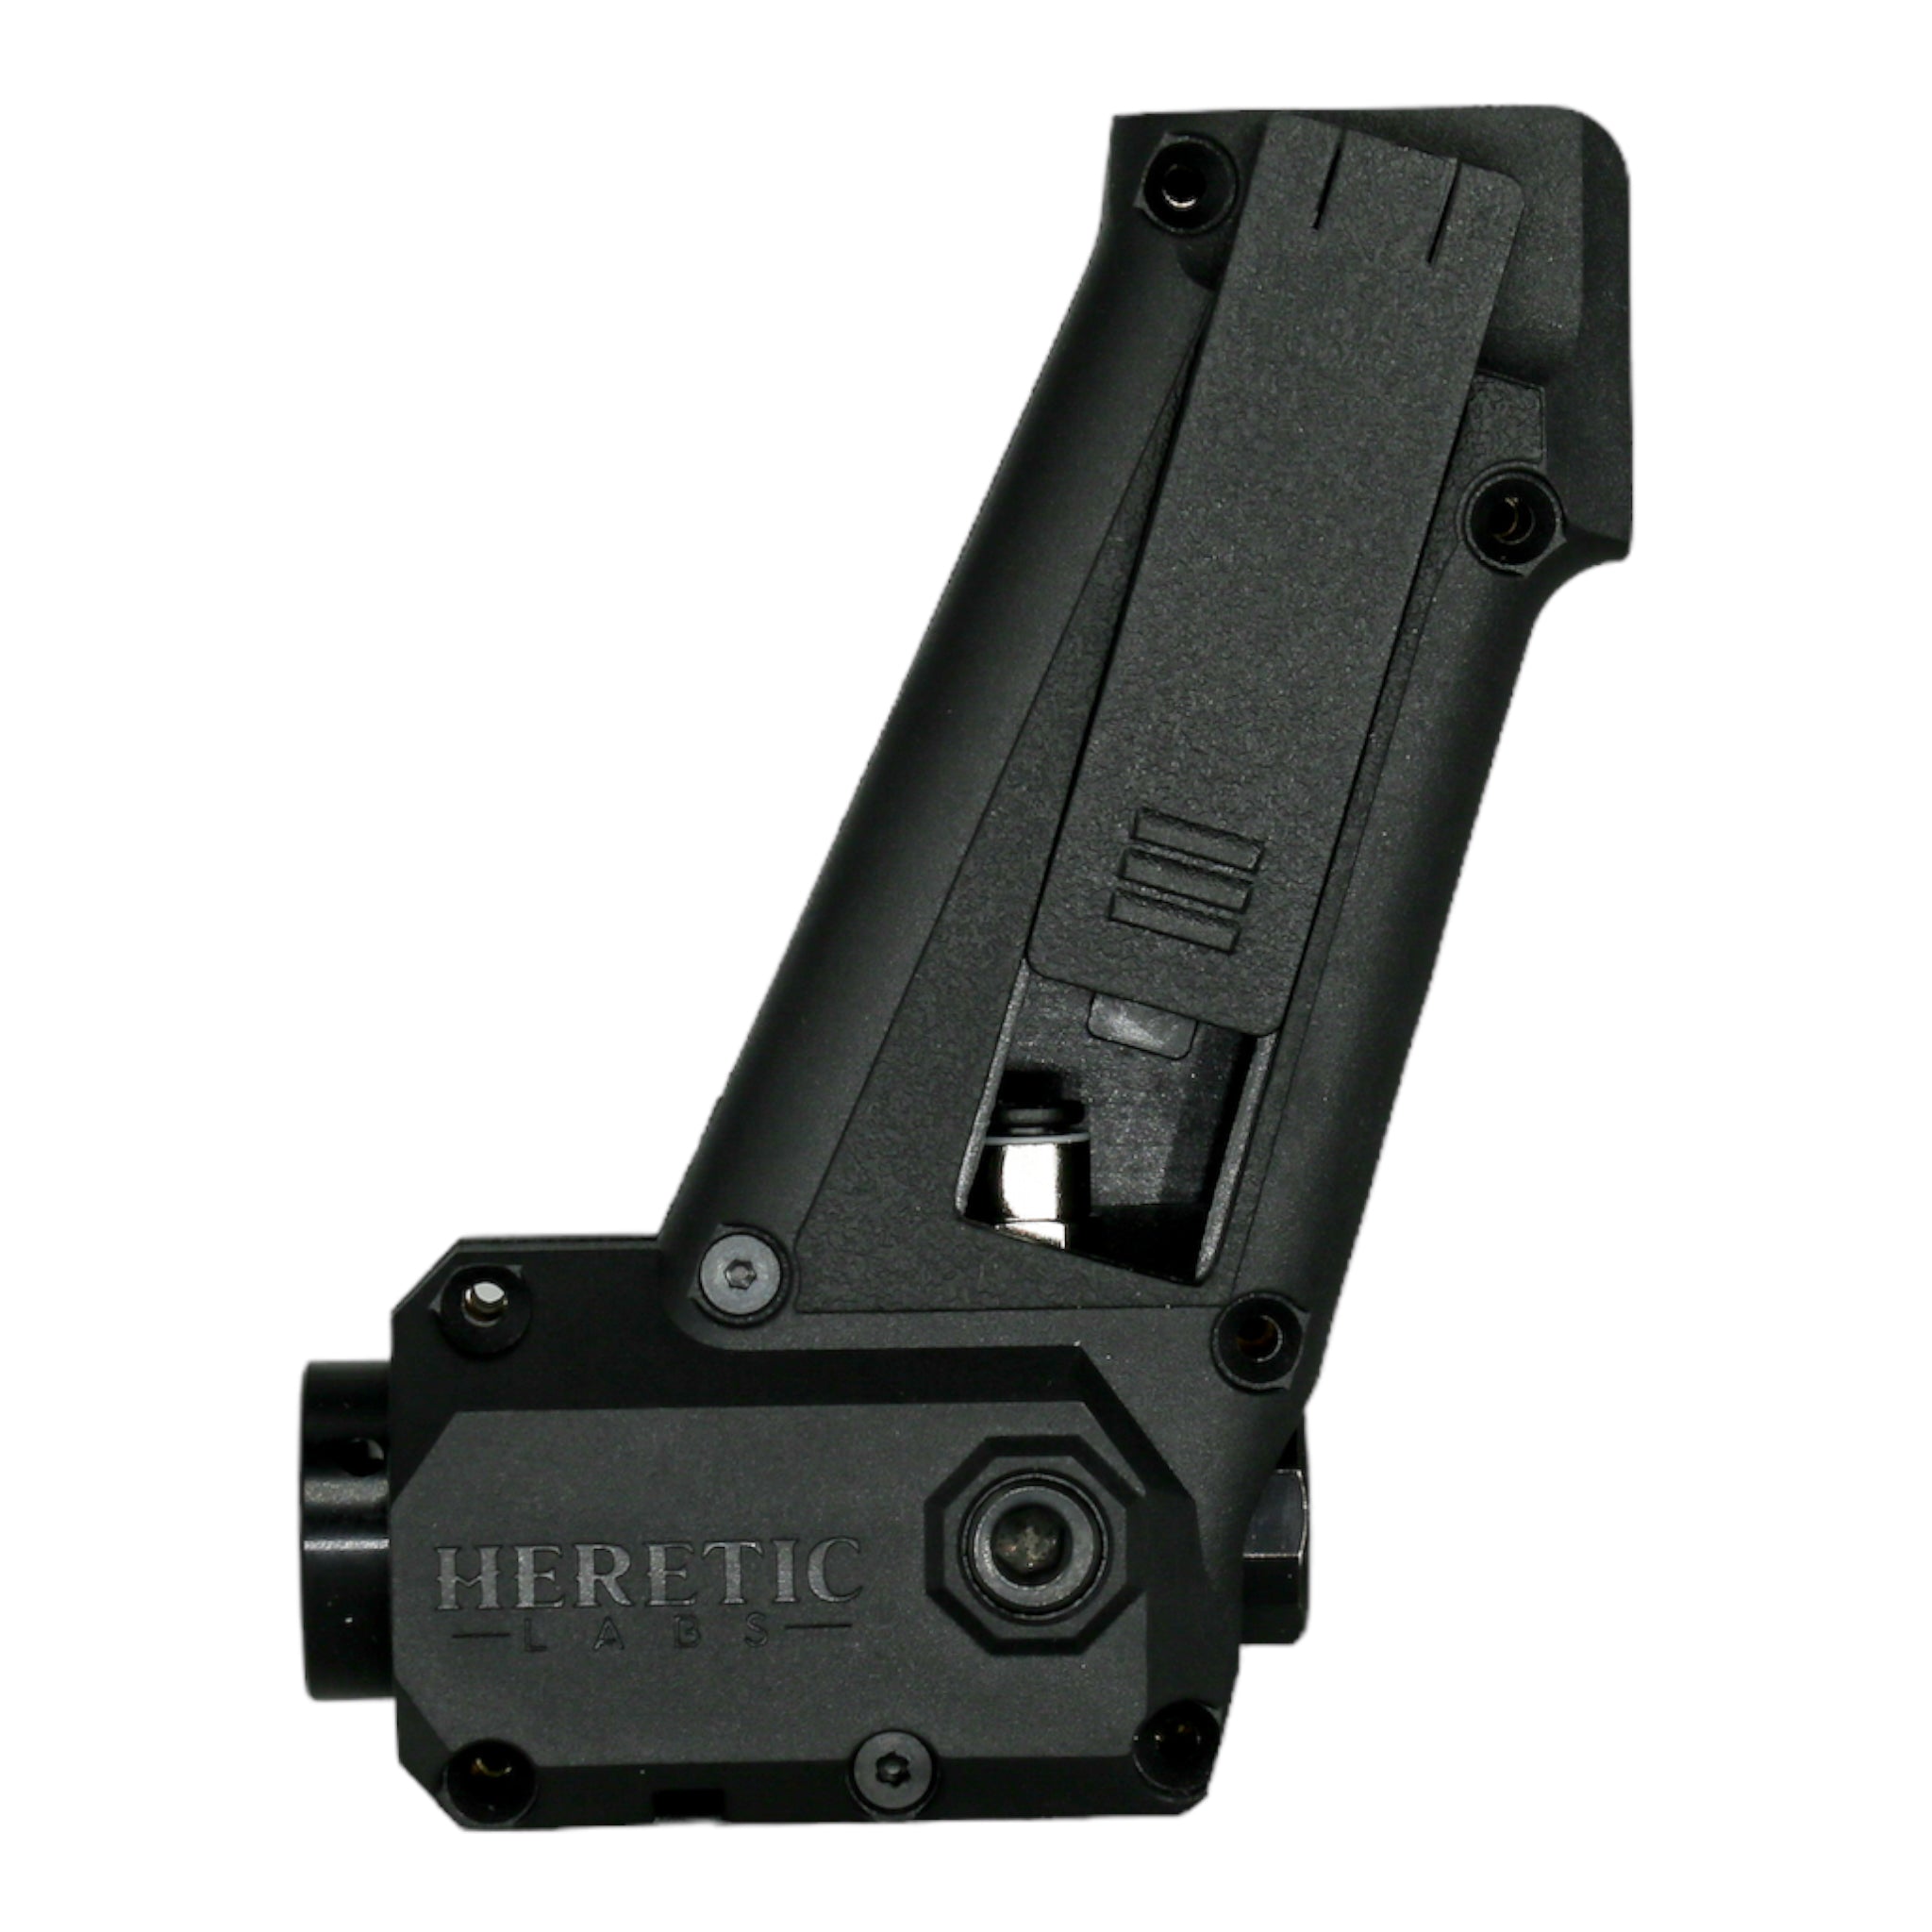 Wolverine/Heretic Labs Tank Grip for MTW/Article I - ssairsoft.com